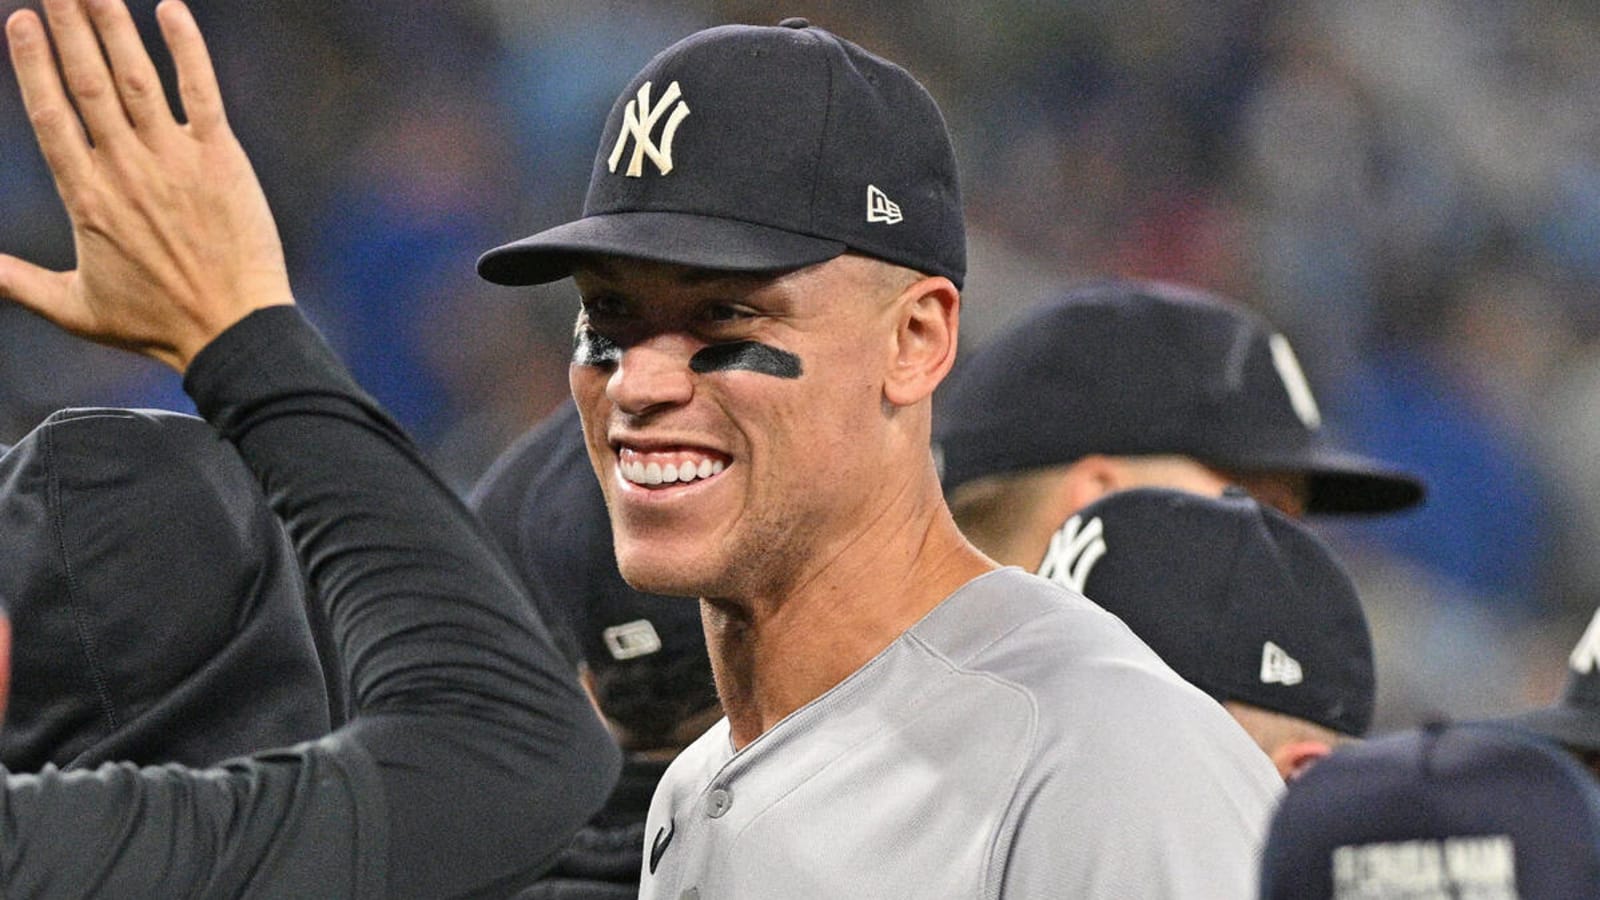 Yankees might move game from Amazon Prime to YES Network amid Judge's record chase